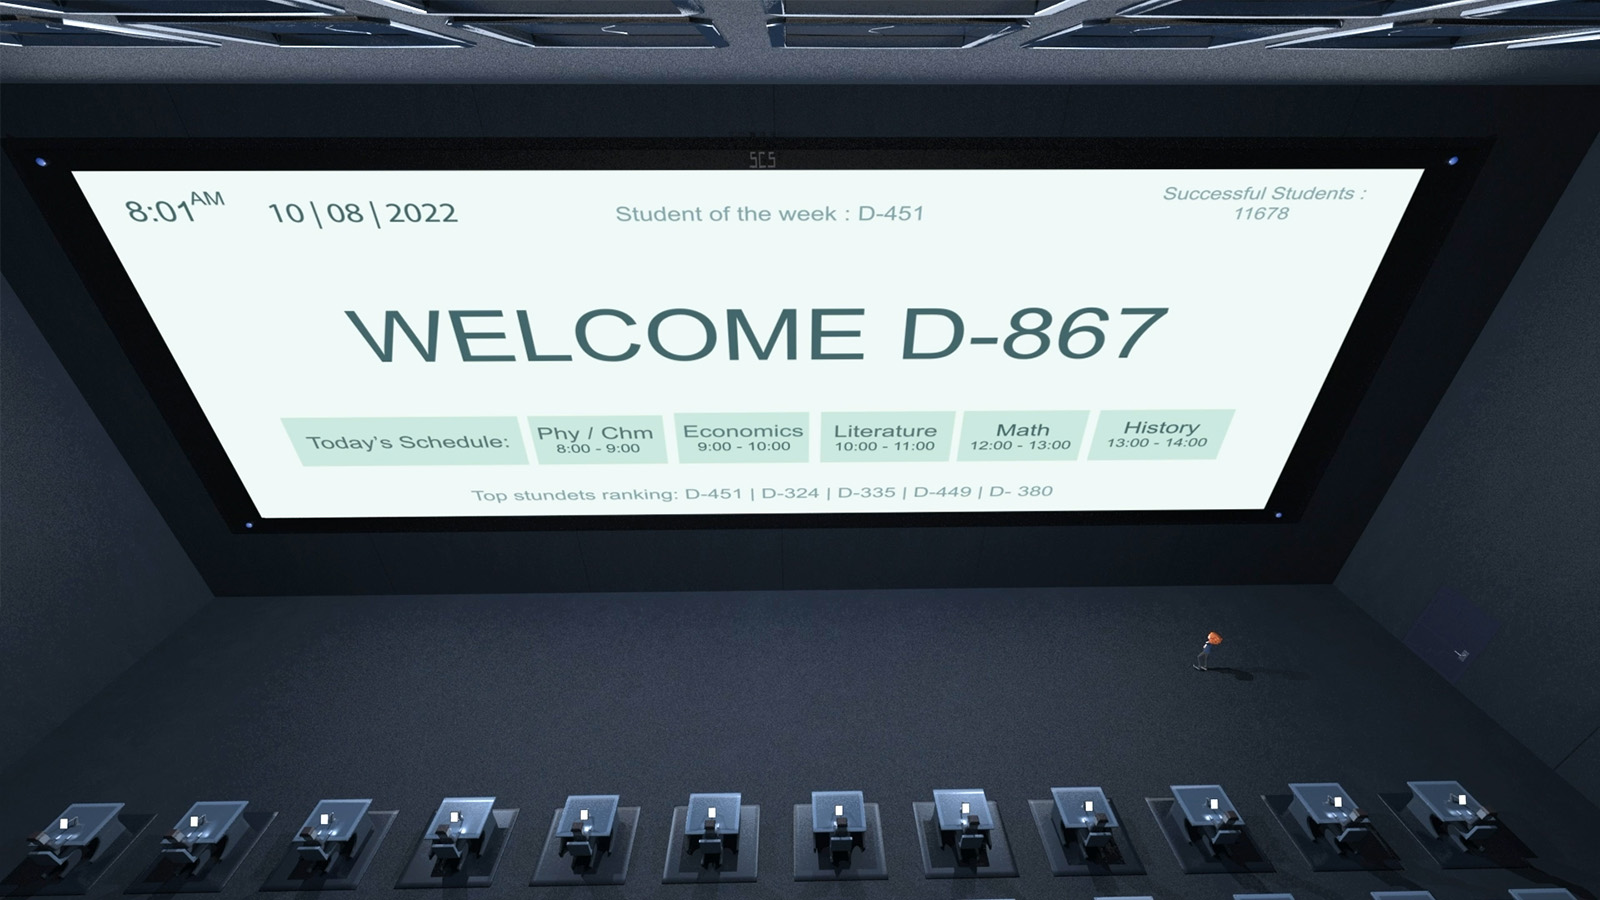 A massive screen is illuminated and has 'welcome d-867' written on it.